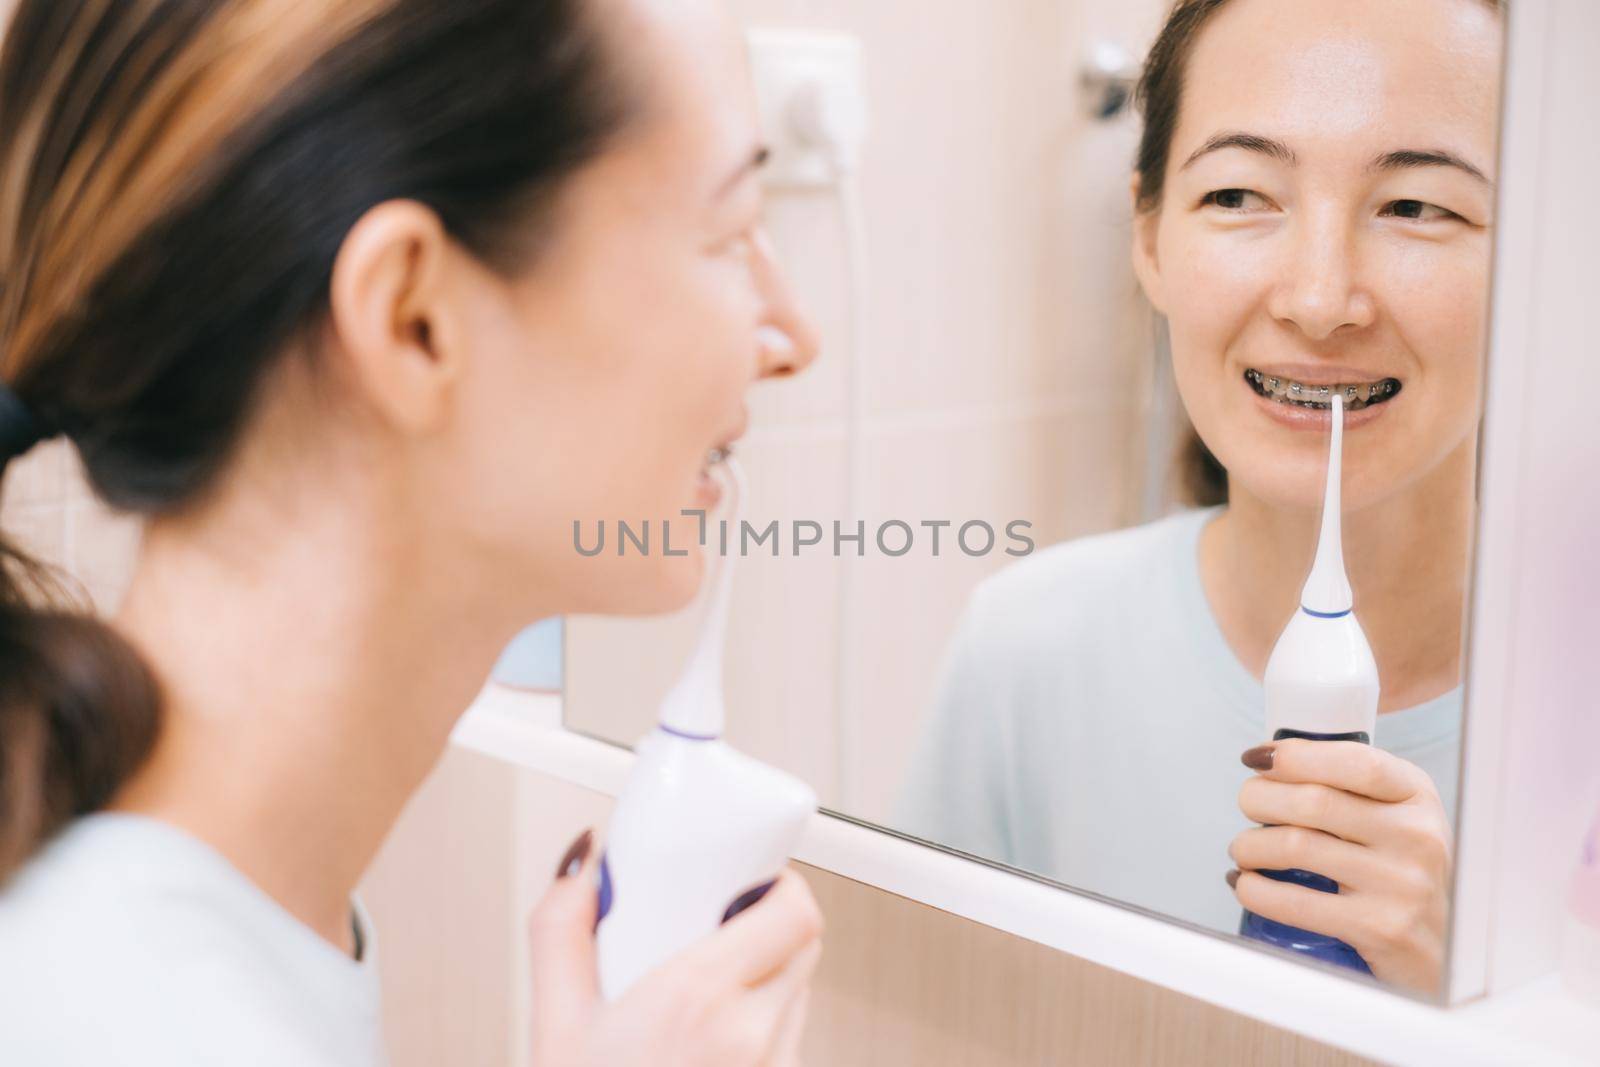 Woman with braces on her teeth brushing her teeth with by using a irrigate, before mirror. by alexAleksei